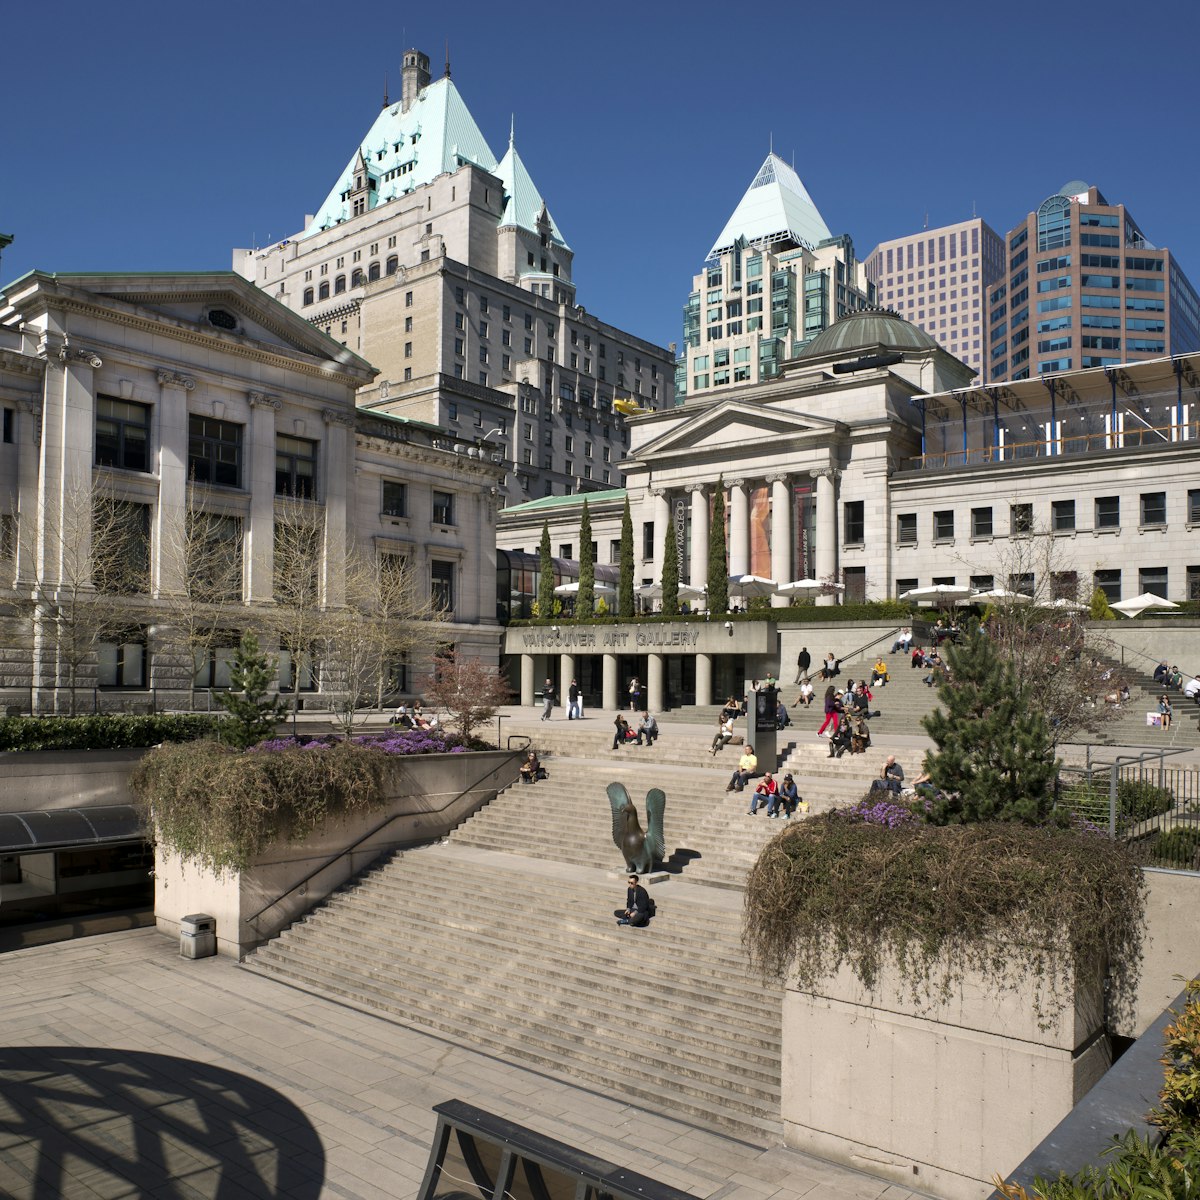 VANCOUVER - APRIL 12, 2014: Founded in 1931, Vancouver Art Gallery is the fifth-largest art gallery in Canada. Neoclassical building was designed by F. Rattenbury and  is located at 750 Hornby Street.
187310384
art, british, british columbia, building, canada, city, columbia, f.rattenbury, gallery, historic, hornby, hornby street, hotel, neoclassical, old, robson, square, stairs, street, vancouver, vancouver art gallery, vancouver b.c., vancouver bc, vancouver british columbia